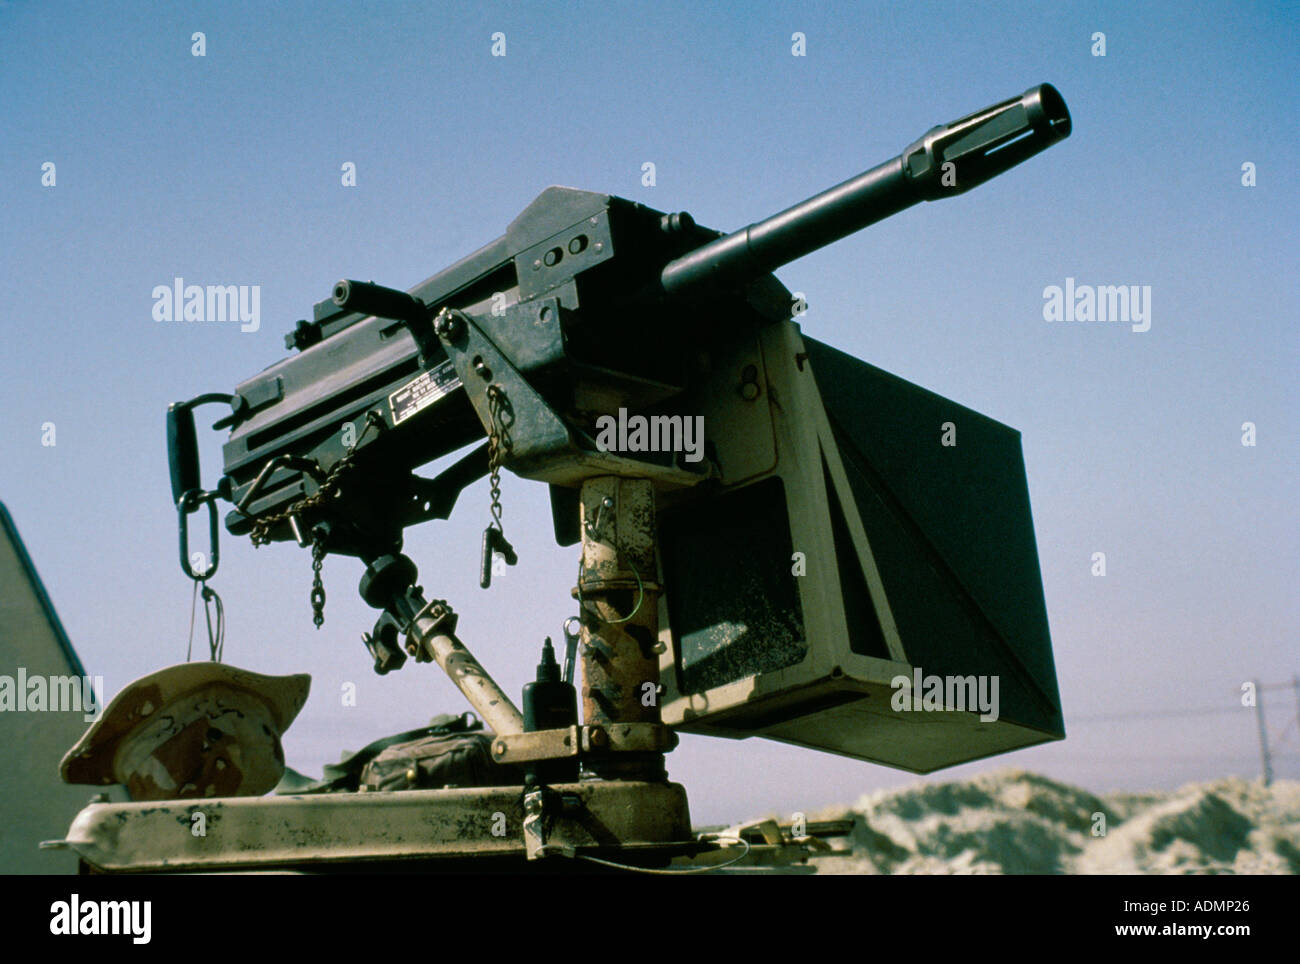 Low angle view of a Mark-19 automatic grenade launcher Stock Photo